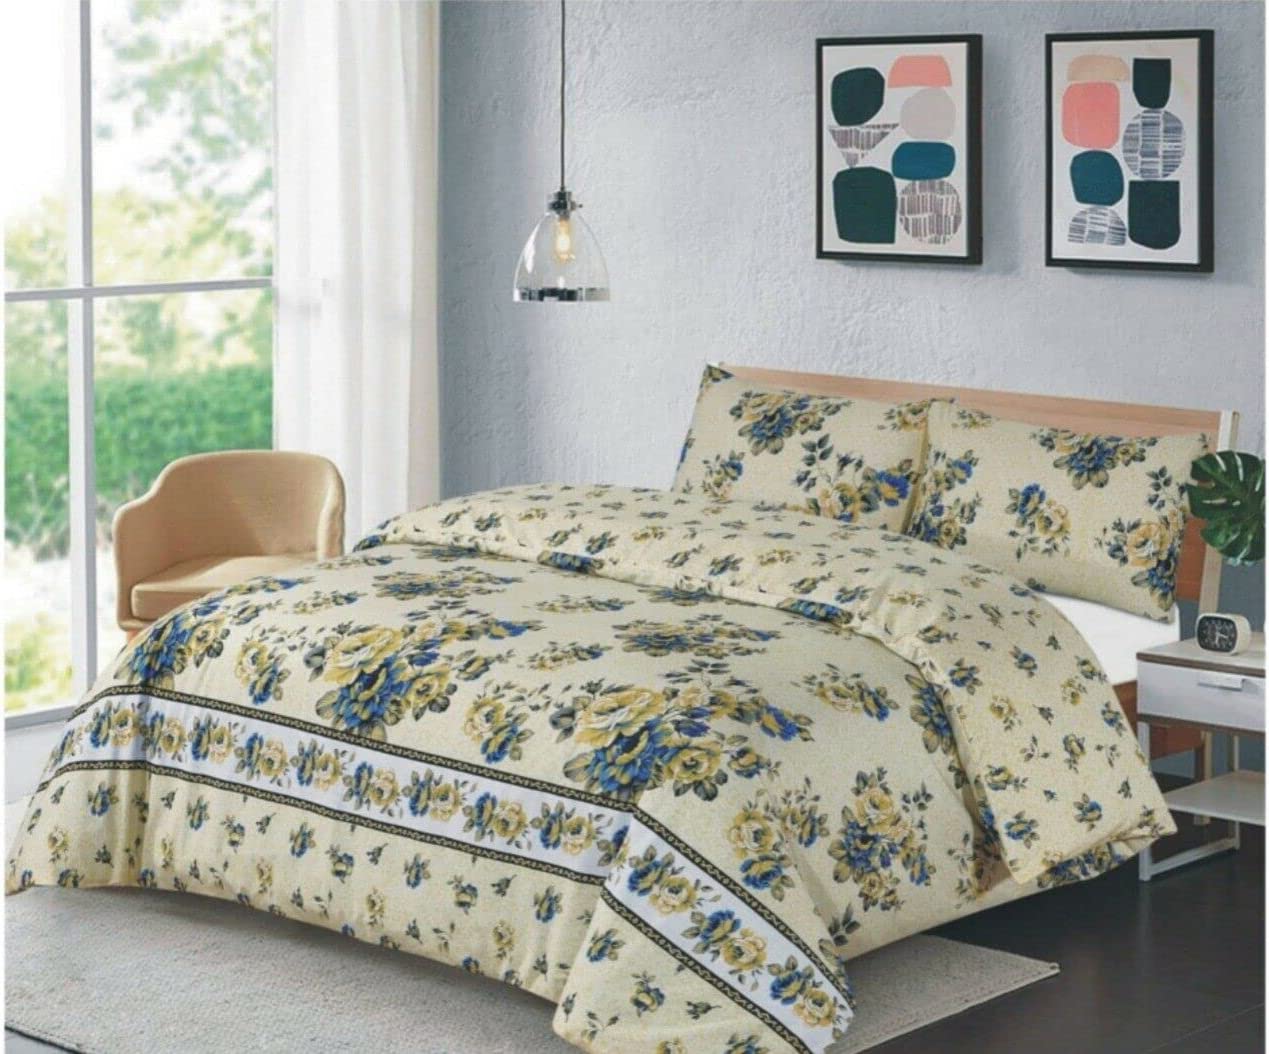 AmigoZone Duvet Cover Set Beautiful Floral Print Quilt Cover Set With Pillow Cases